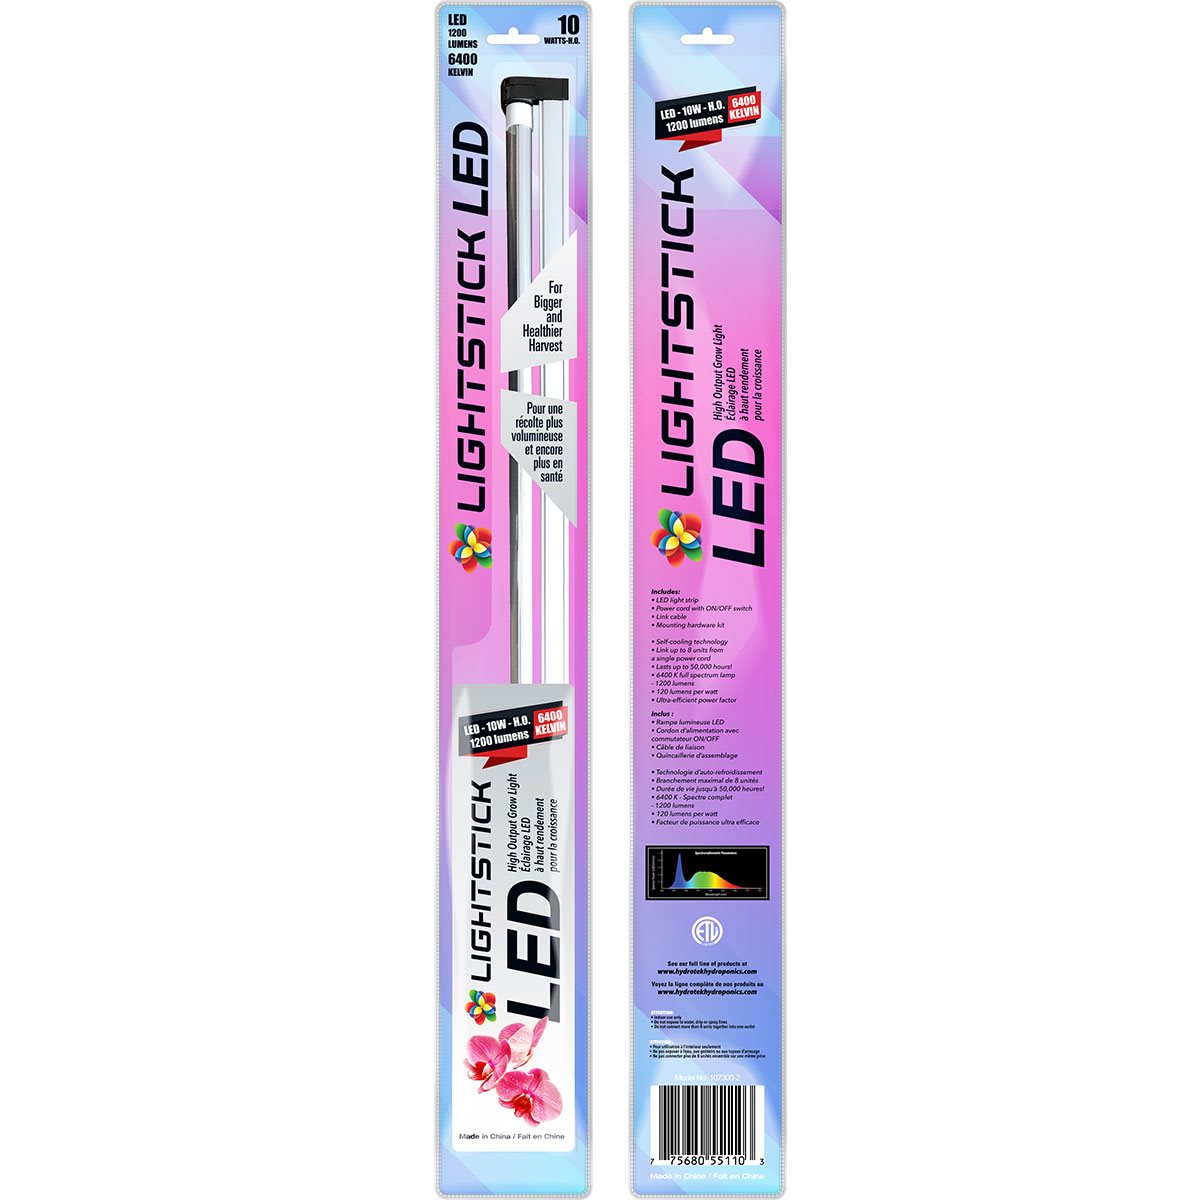 Product Secondary Image:Lightstick LED 2ft Grow Light Strip 10W